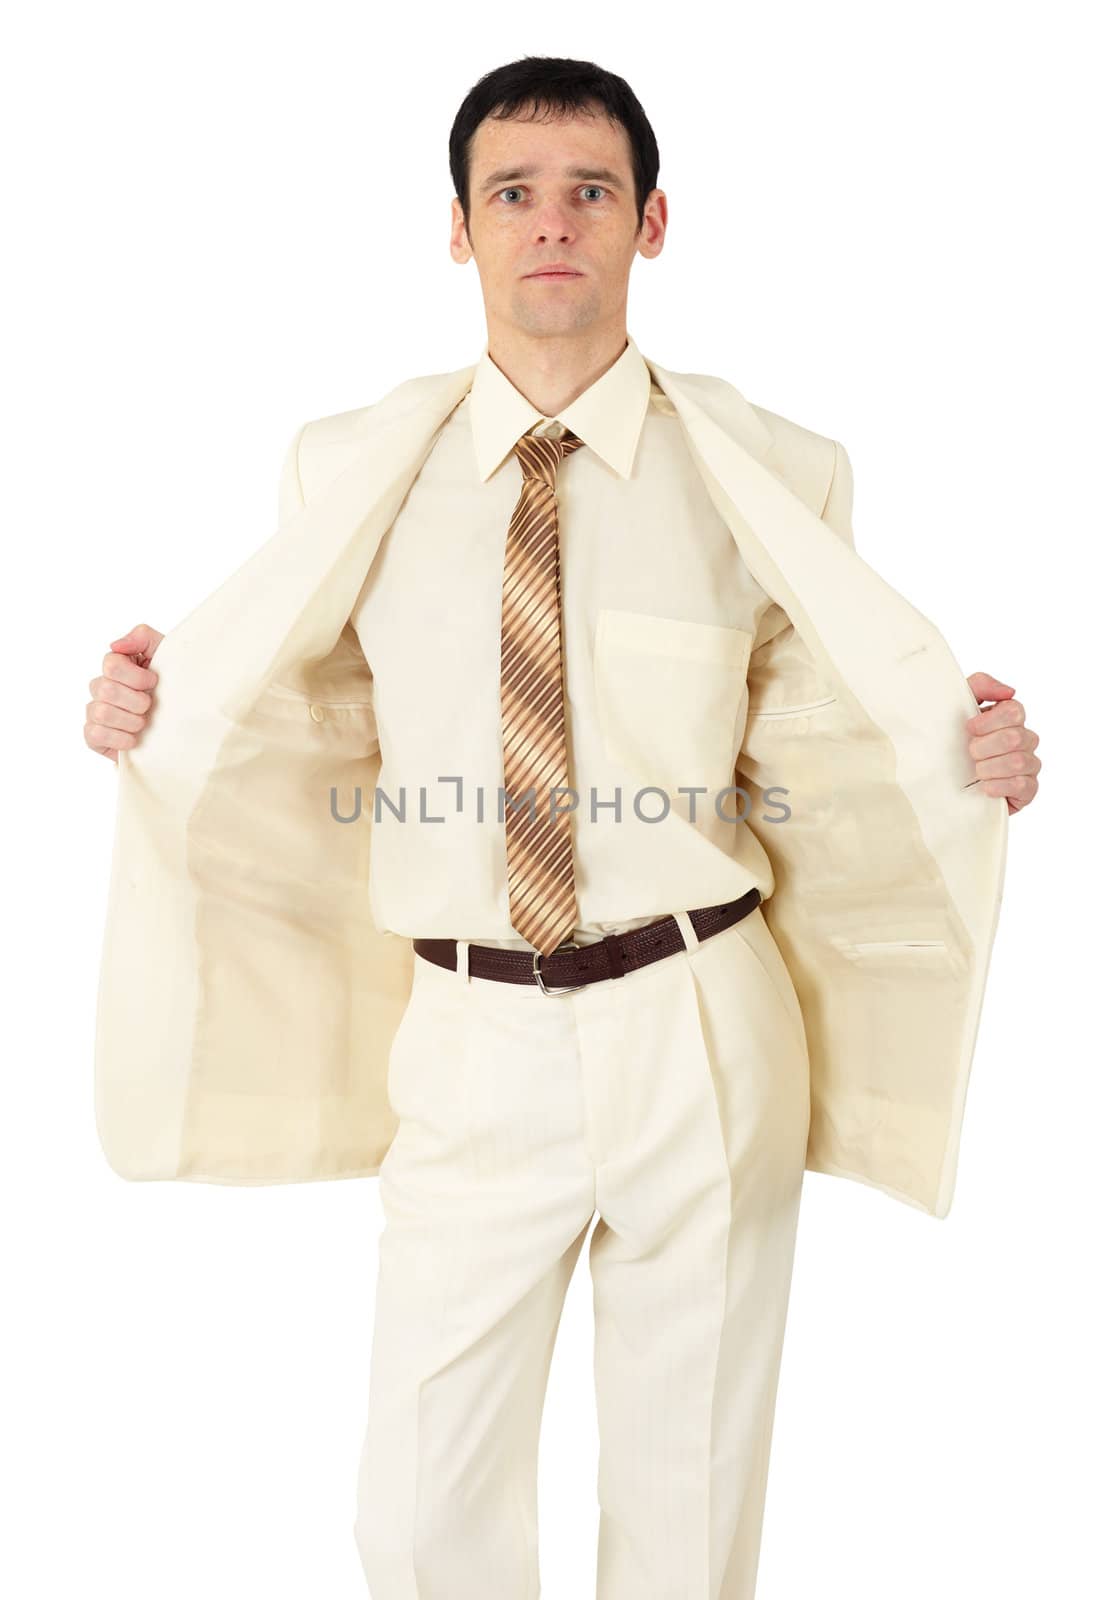 Fashionably dressed young man on white background by pzaxe